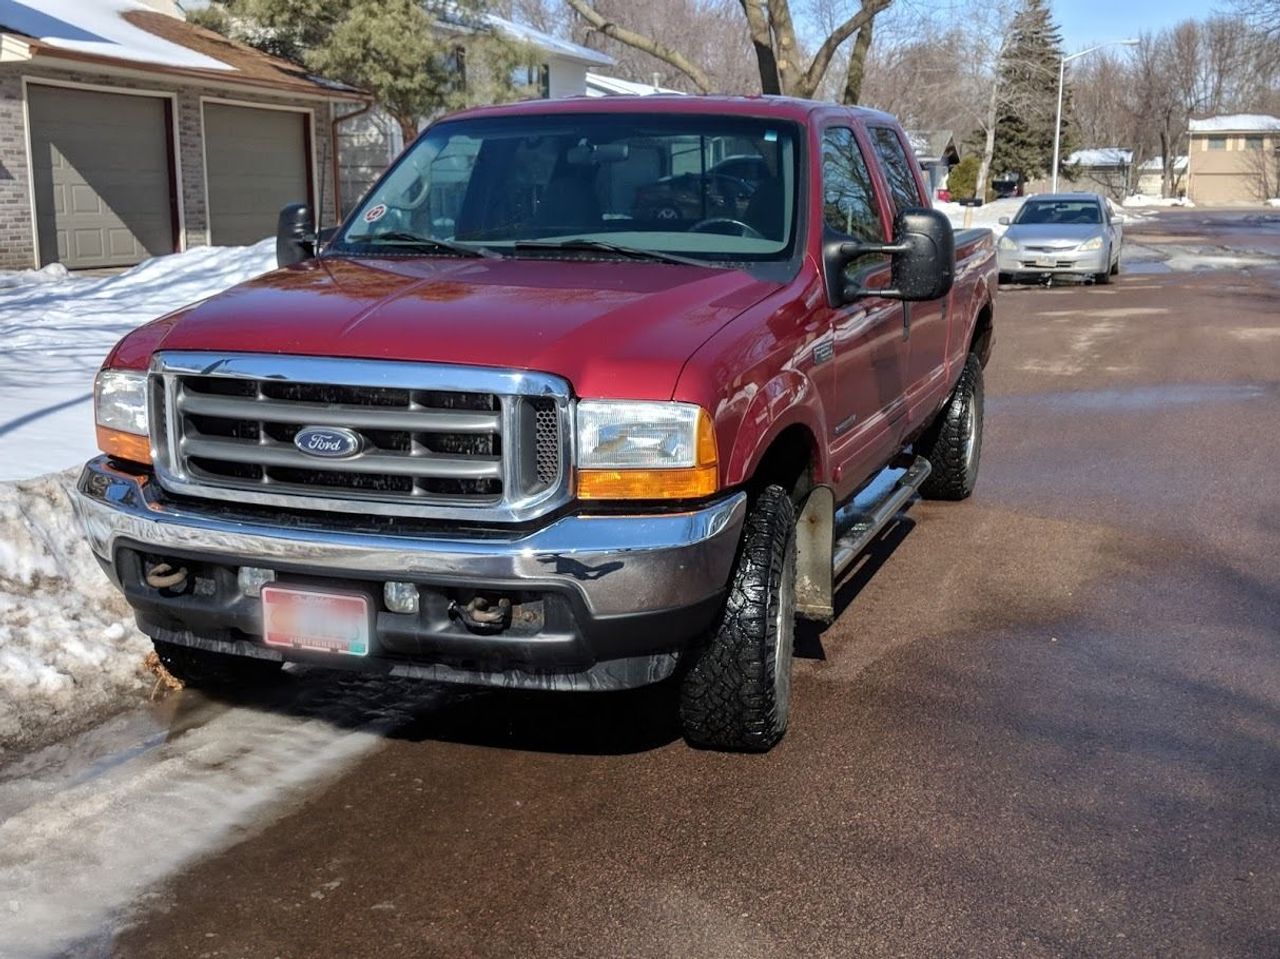 2001 Ford F-250 Super Duty XLT | Sioux Falls, SD, Toreador Red Clearcoat (Red & Orange), 4 Wheel